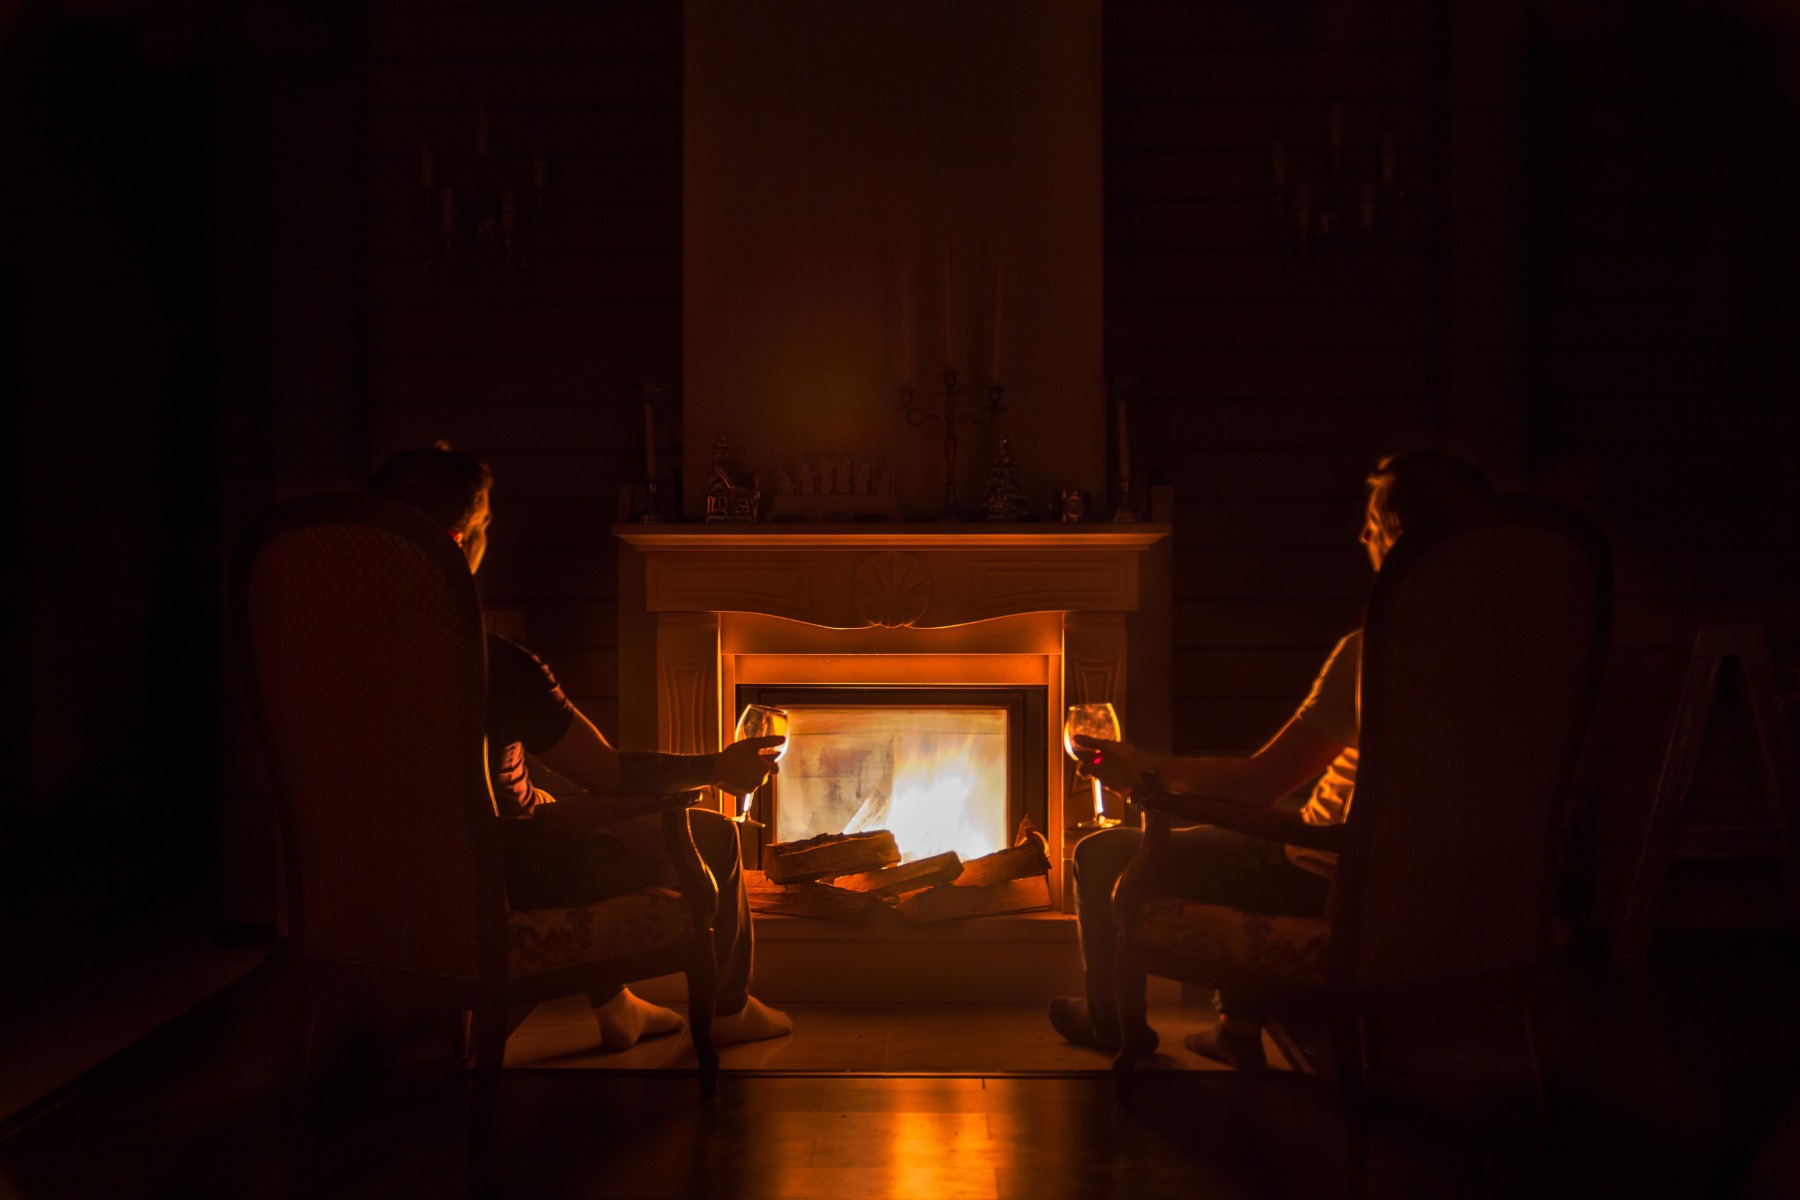 Two men having wine while sitting next to a roaring fireplace